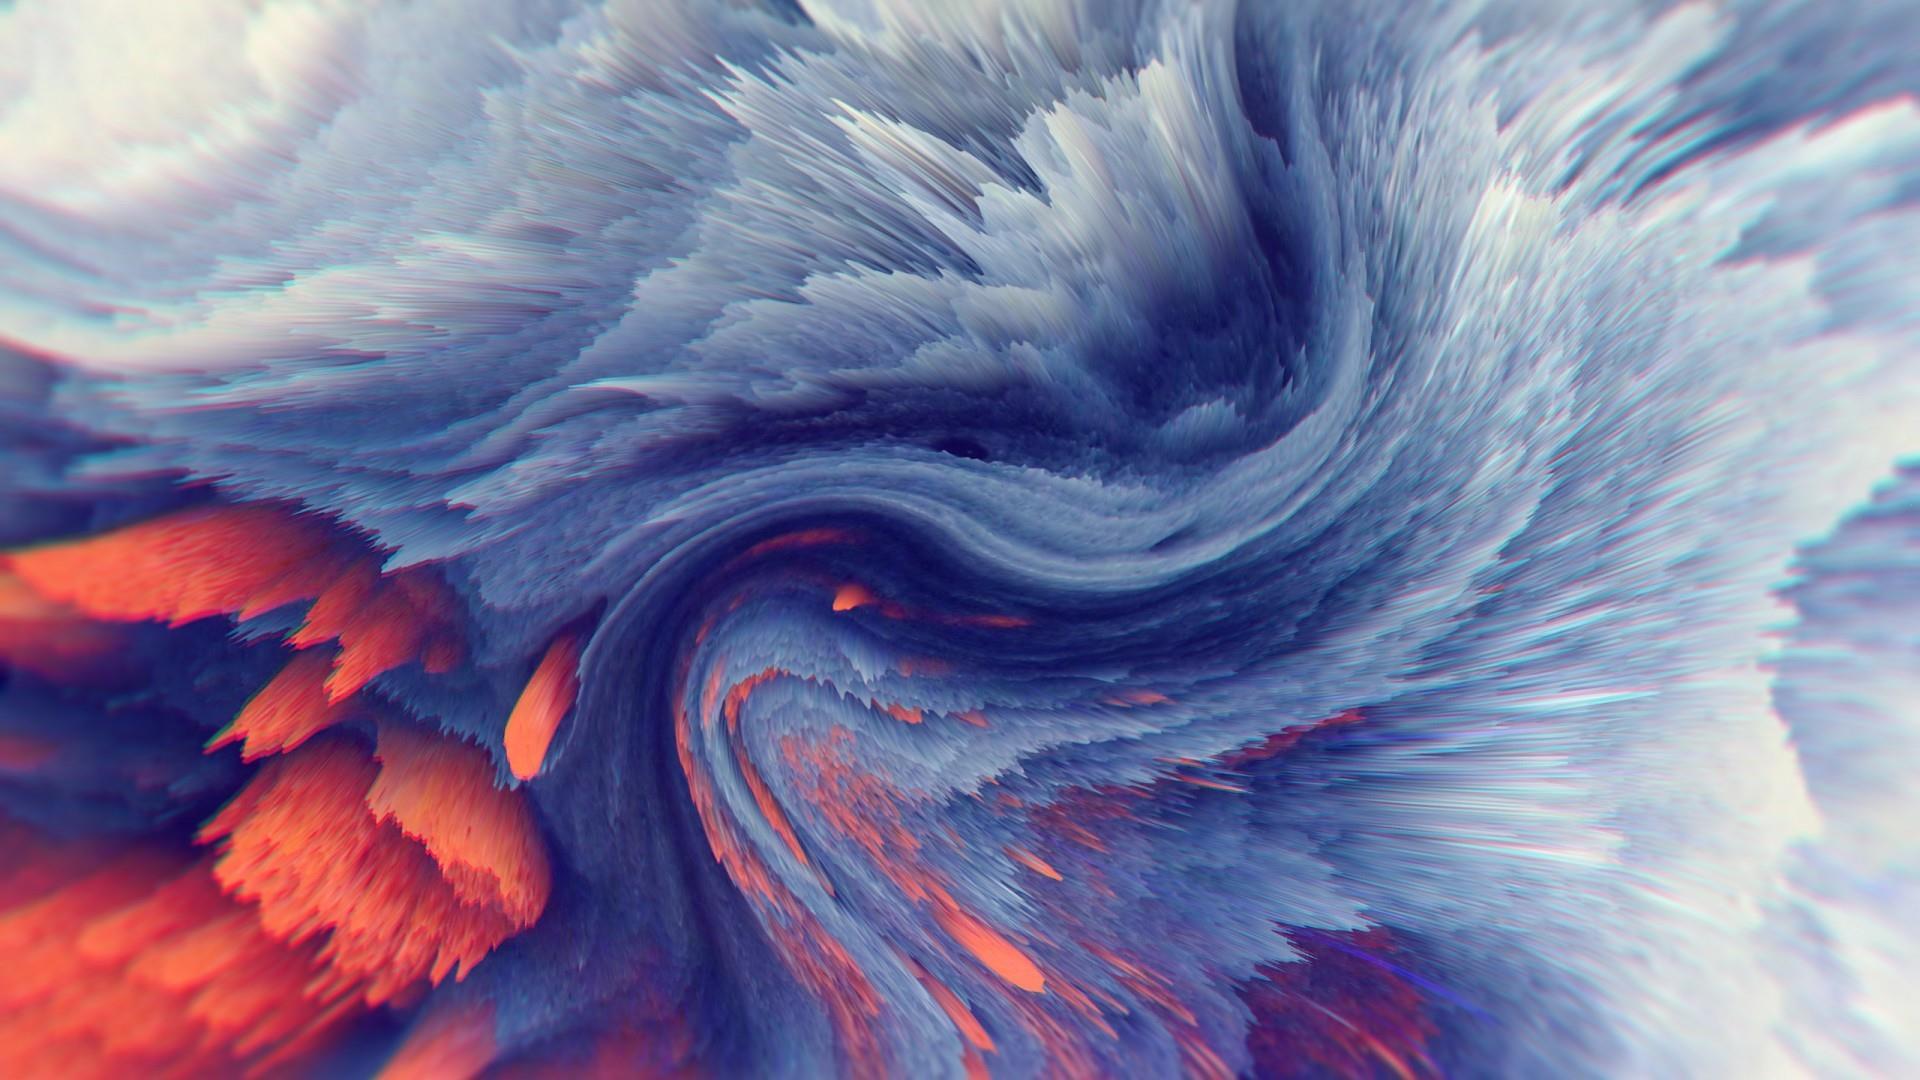 Red And Blue Waves Wallpaper. Wallpaper Studio 10